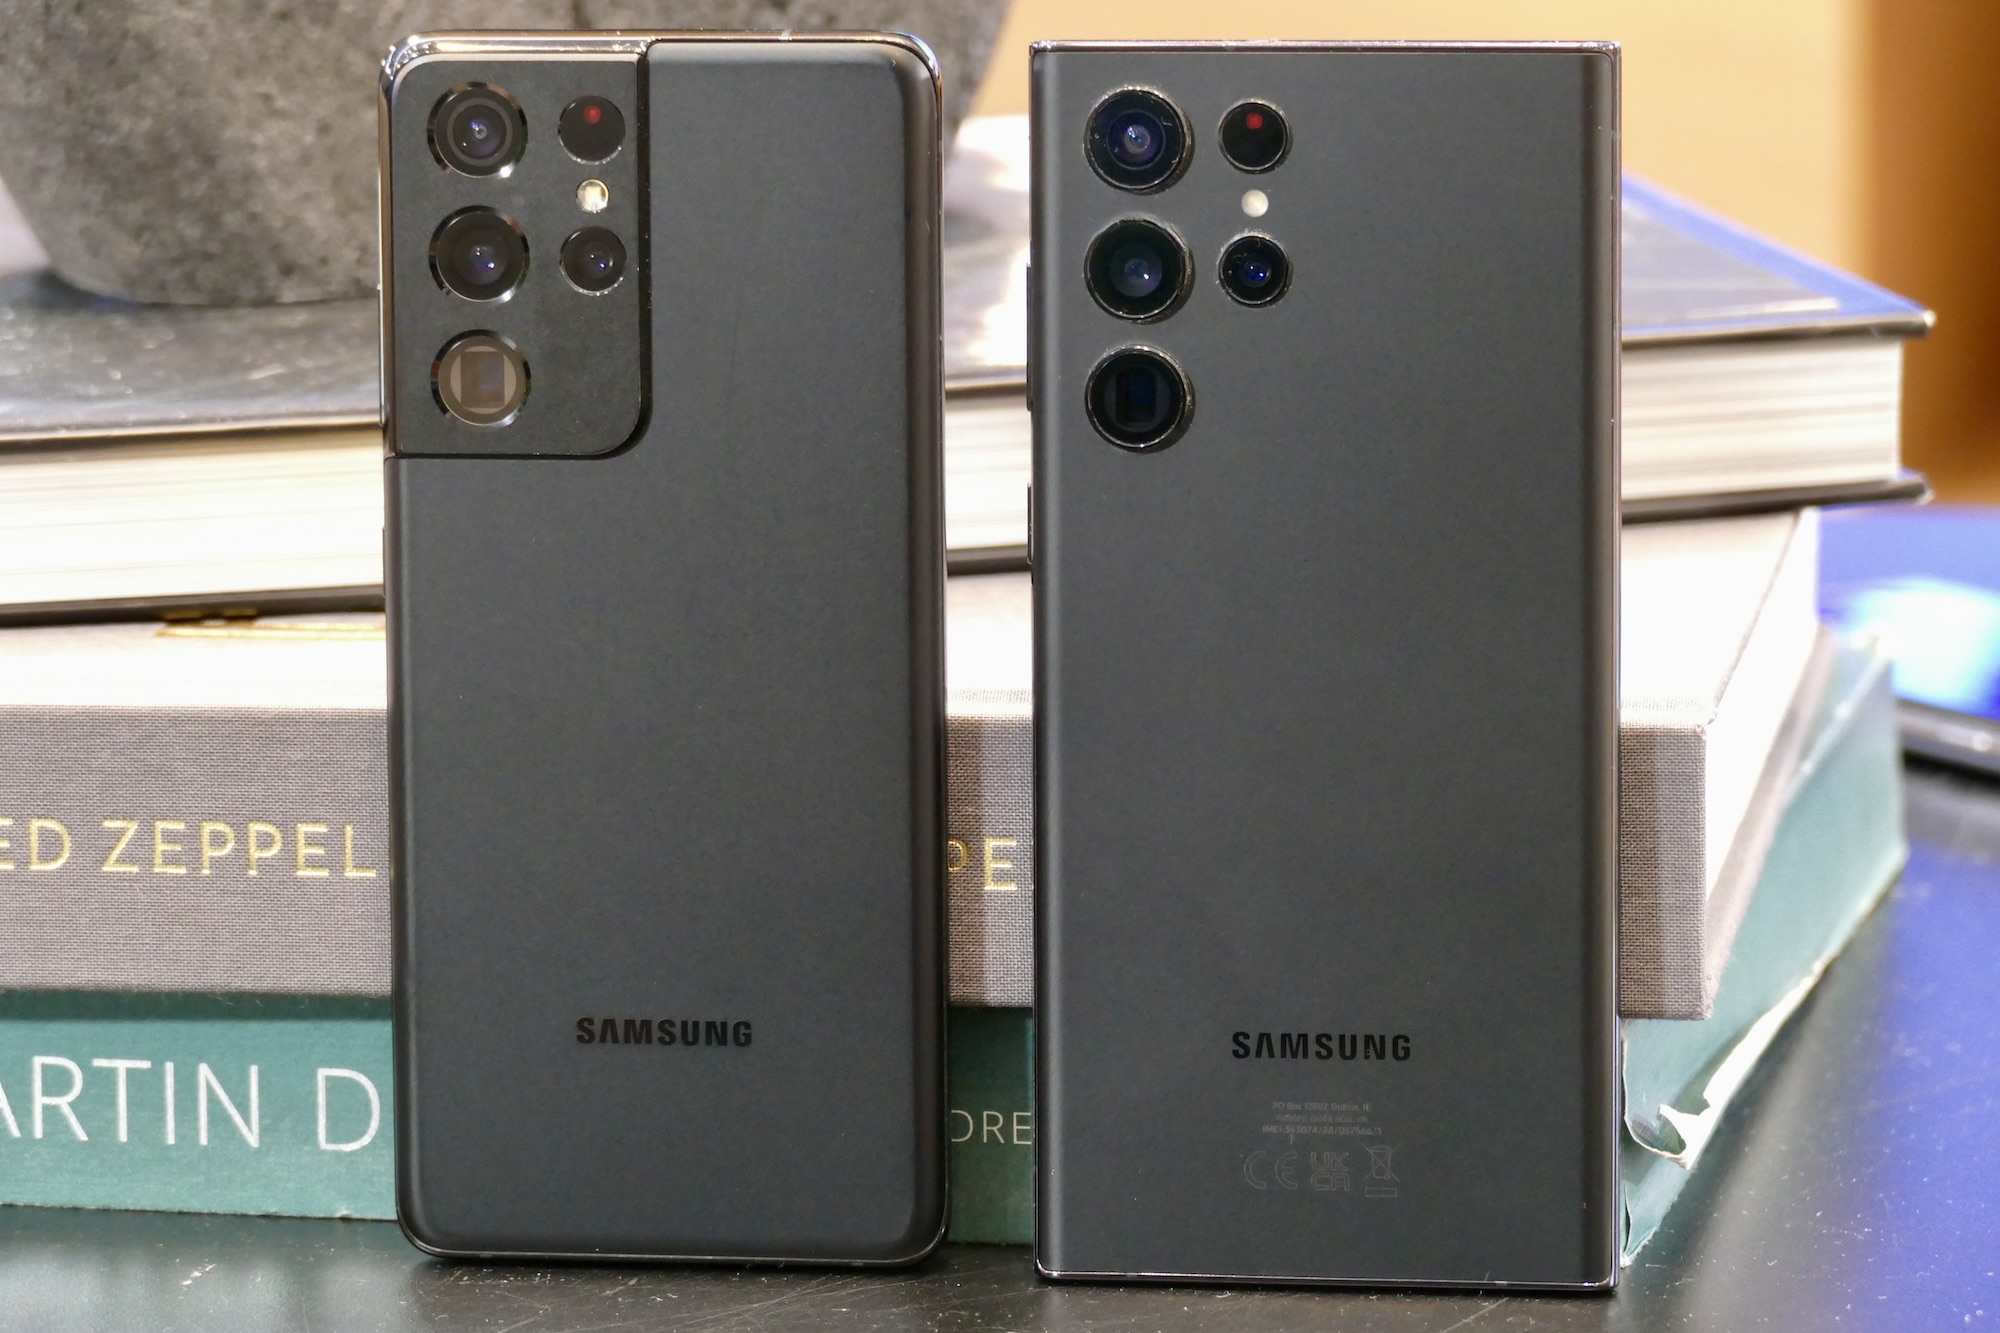 Samsung Galaxy S22 Ultra hands-on: price, release date, & more